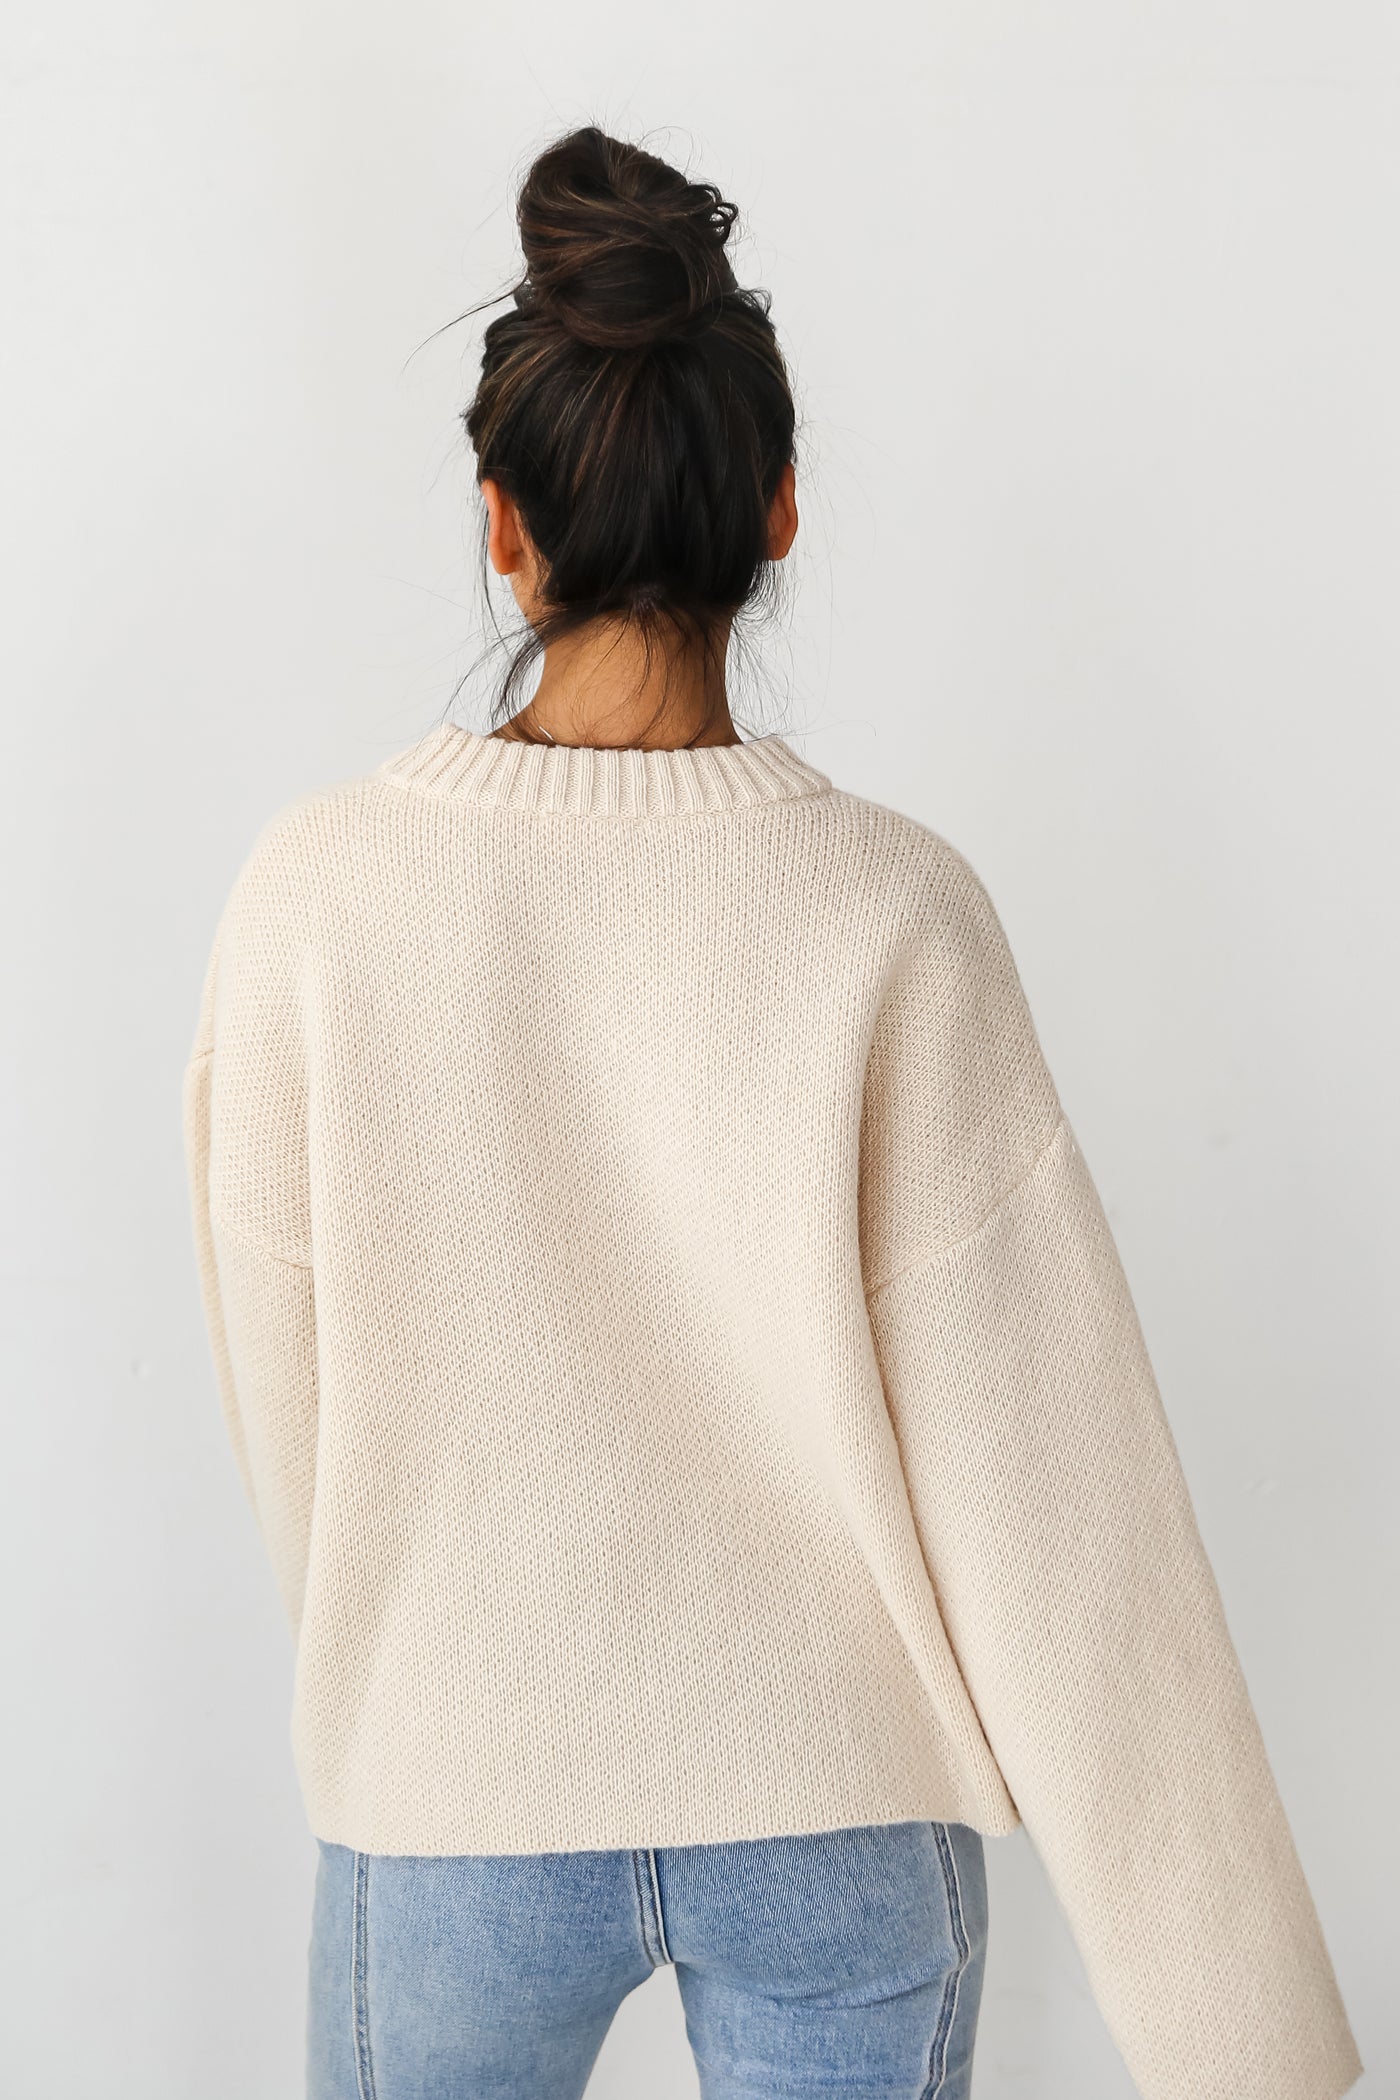 taupe Oversized Sweater back view